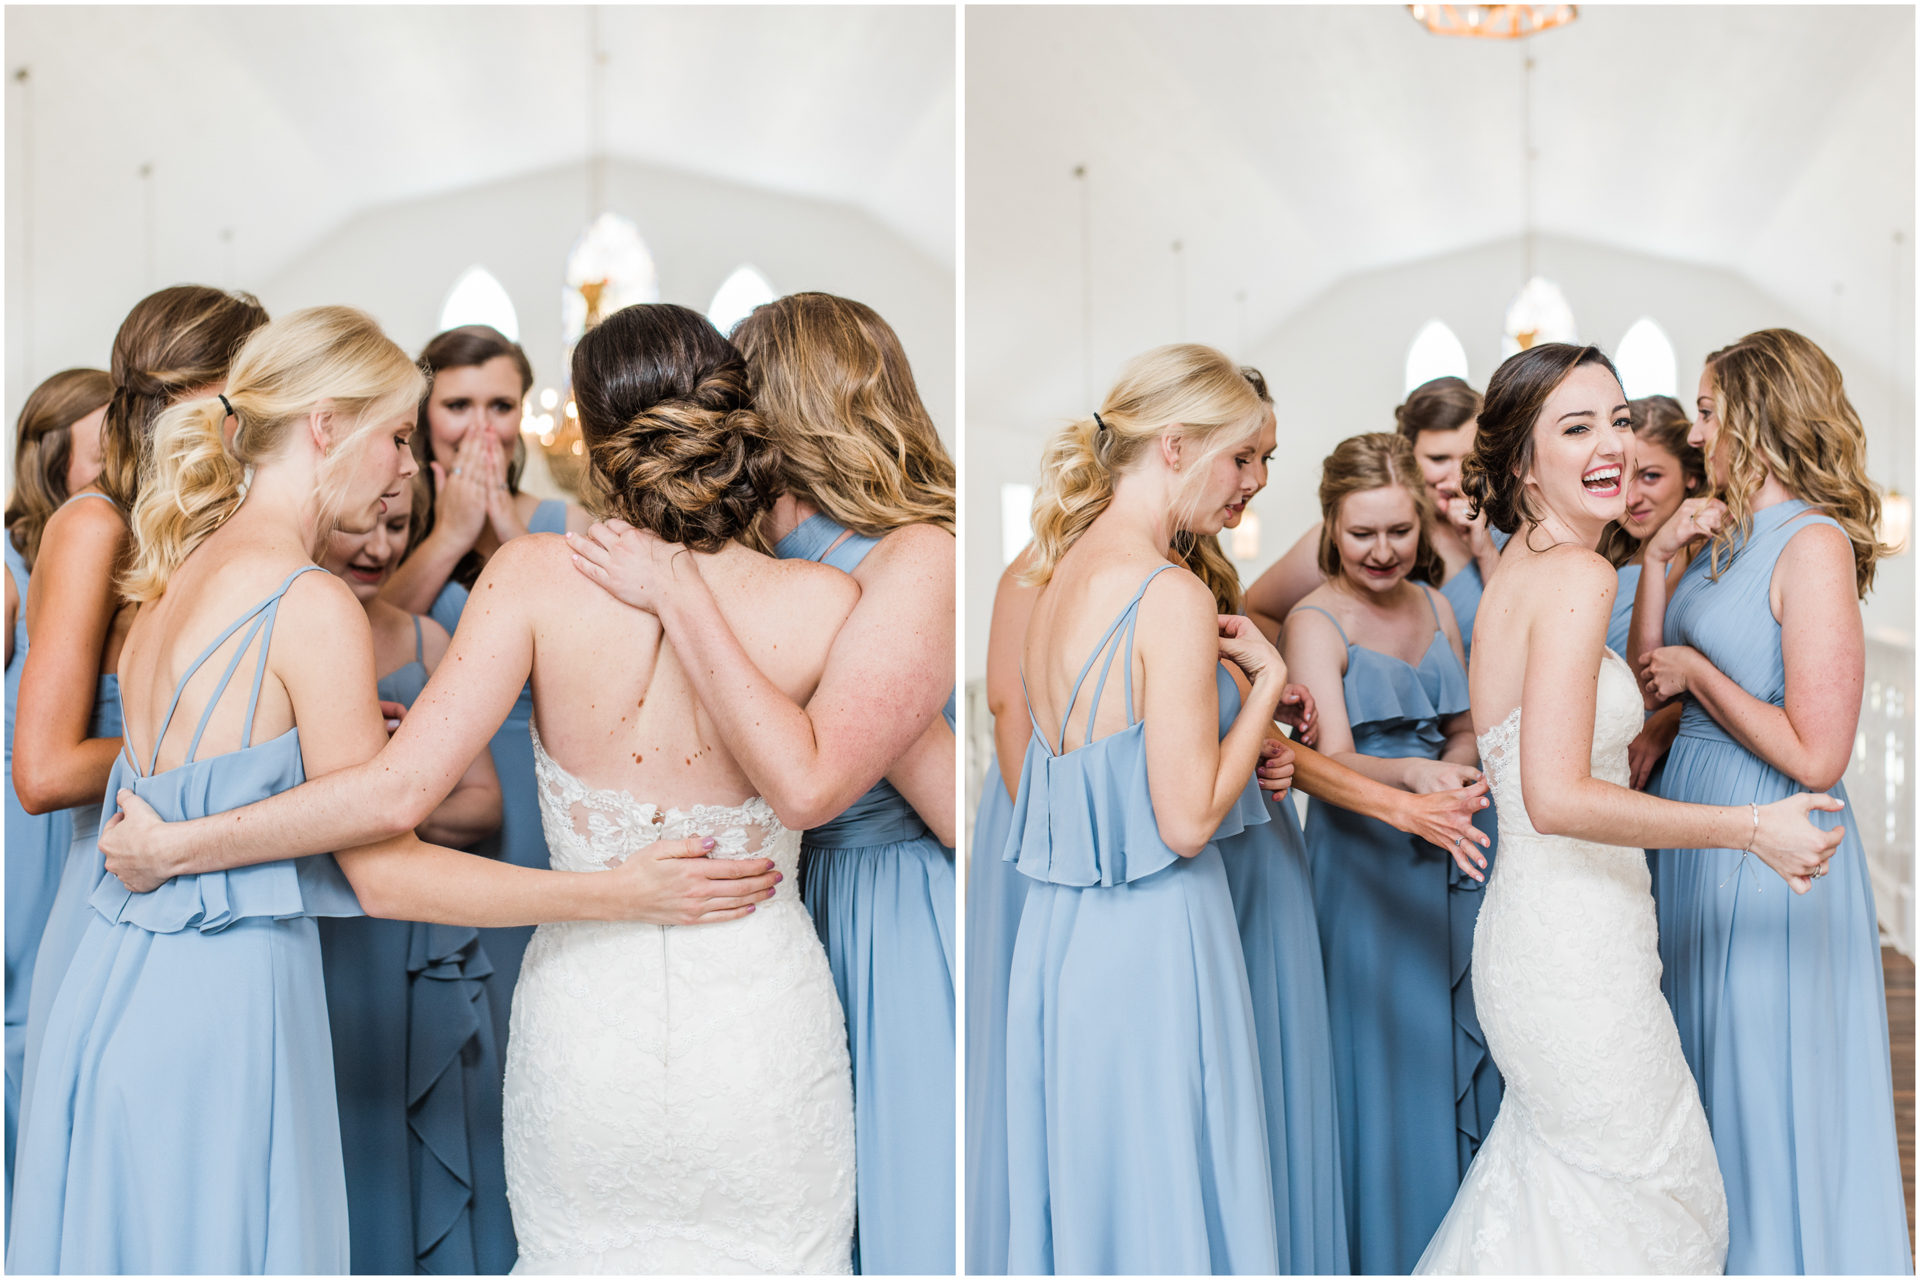 First Look with Bridesmaids hugging bride image - Harvest Hollow Wedding